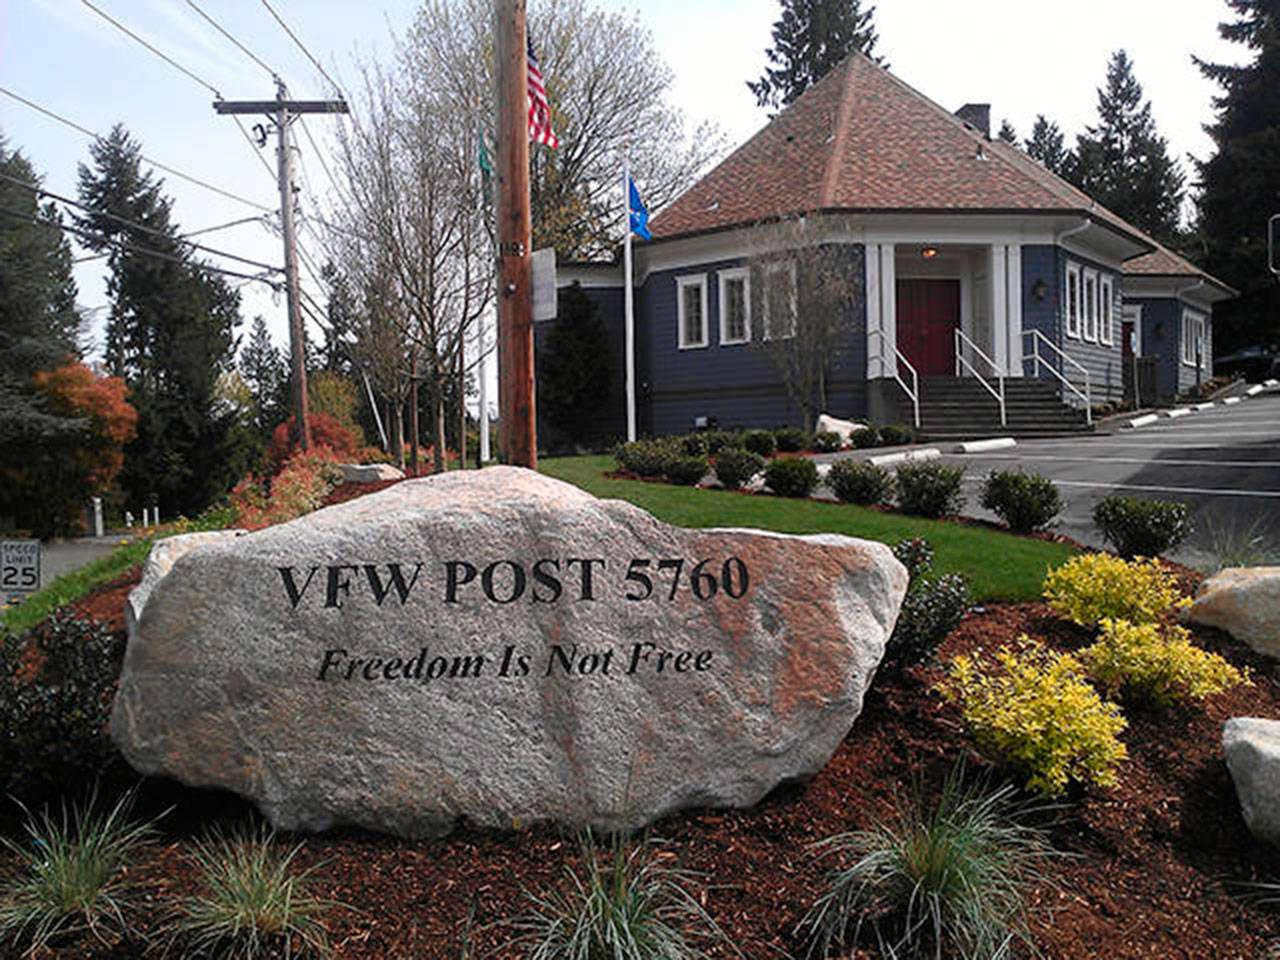 Mercer Island Boy Scout collaborates with VFW to recognize service members